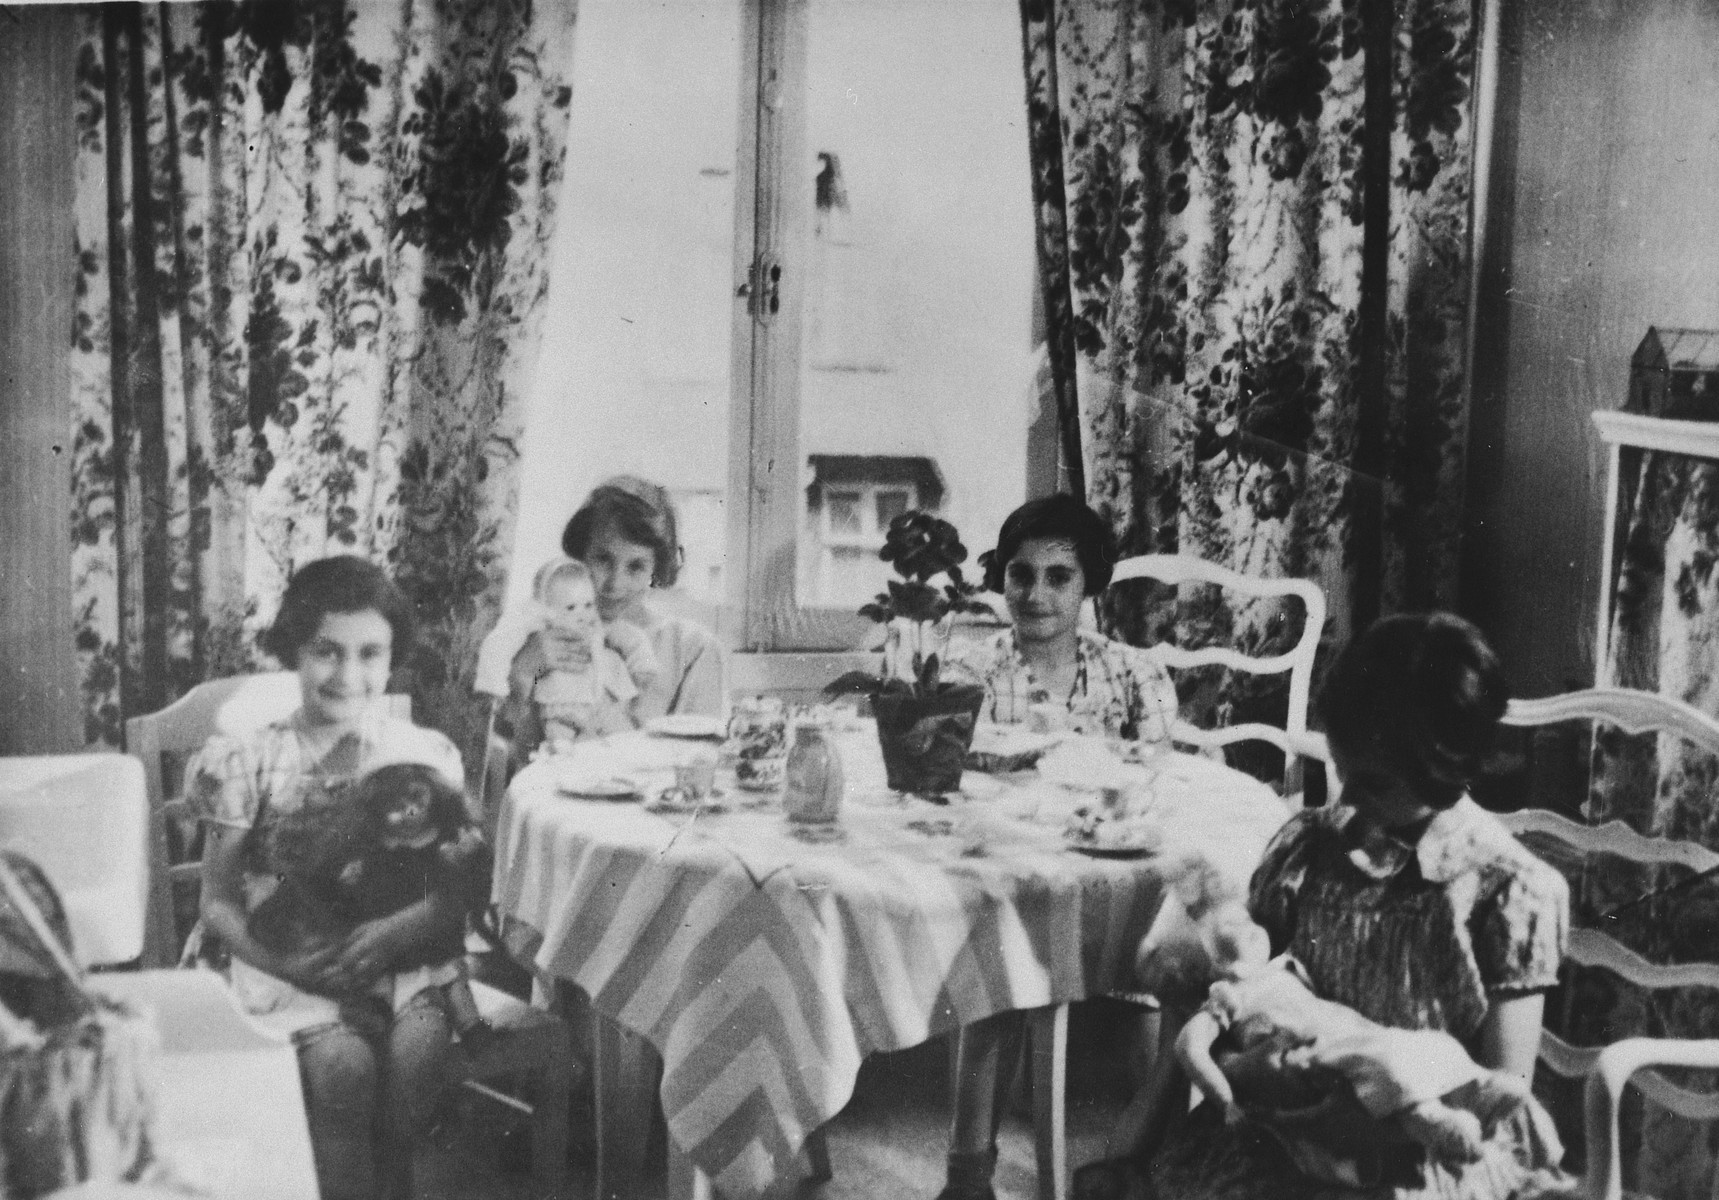 Four young girls from Germany, including Anne and Margot Frank, have a tea party with their dolls at the home of Gabrielle Kahn in Amsterdam.

Pictured from left to right are Anne Frank, Ellen Weinberger, Margot Frank and Gabrielle Kahn.